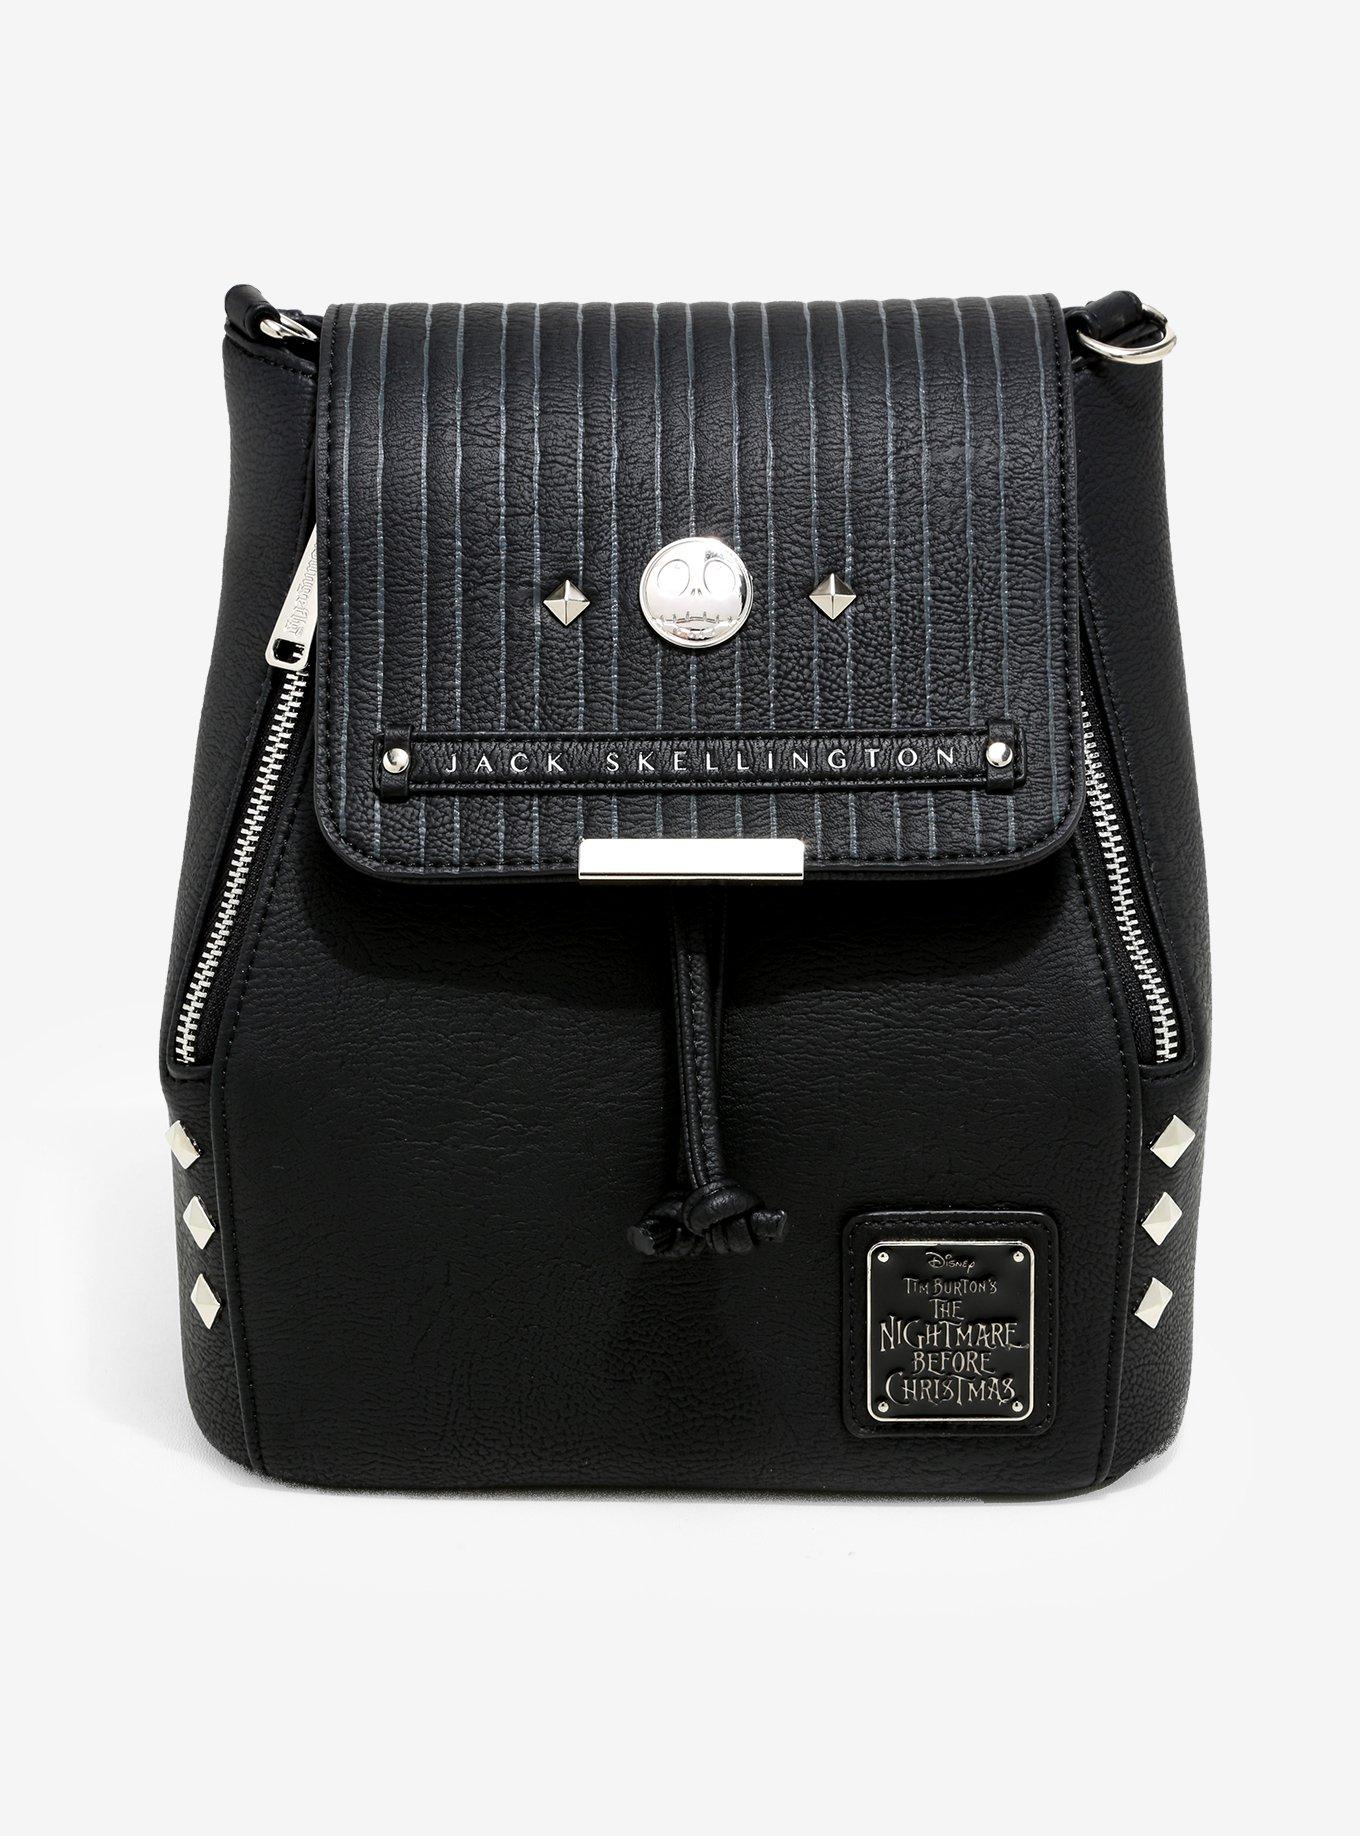 Under £60 SALE  Official Loungefly Backpacks, Handbags and